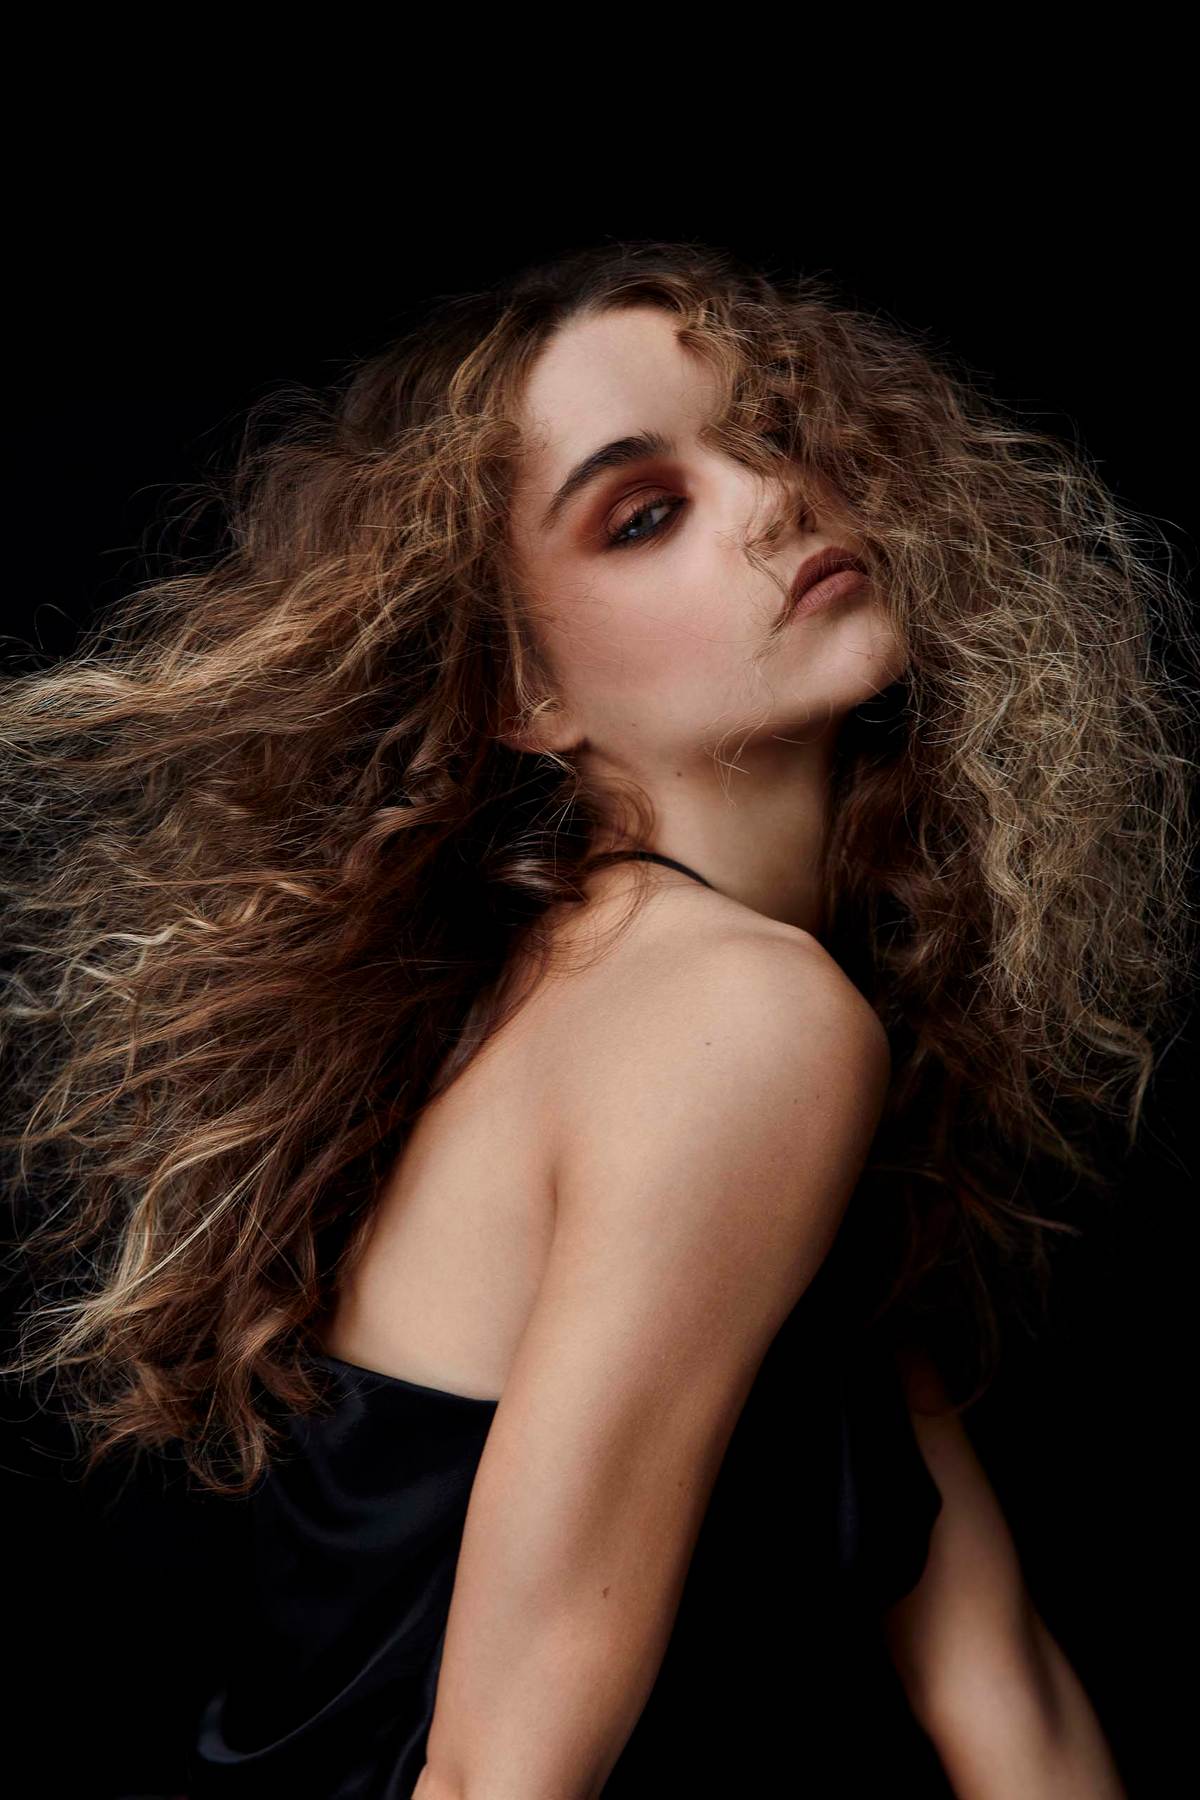 windy_mysterious_WAVES_hair_ambient_lighting_campaign_editorial_beauty_supermodel_dorit_thies_photography_los_angeles.jpg